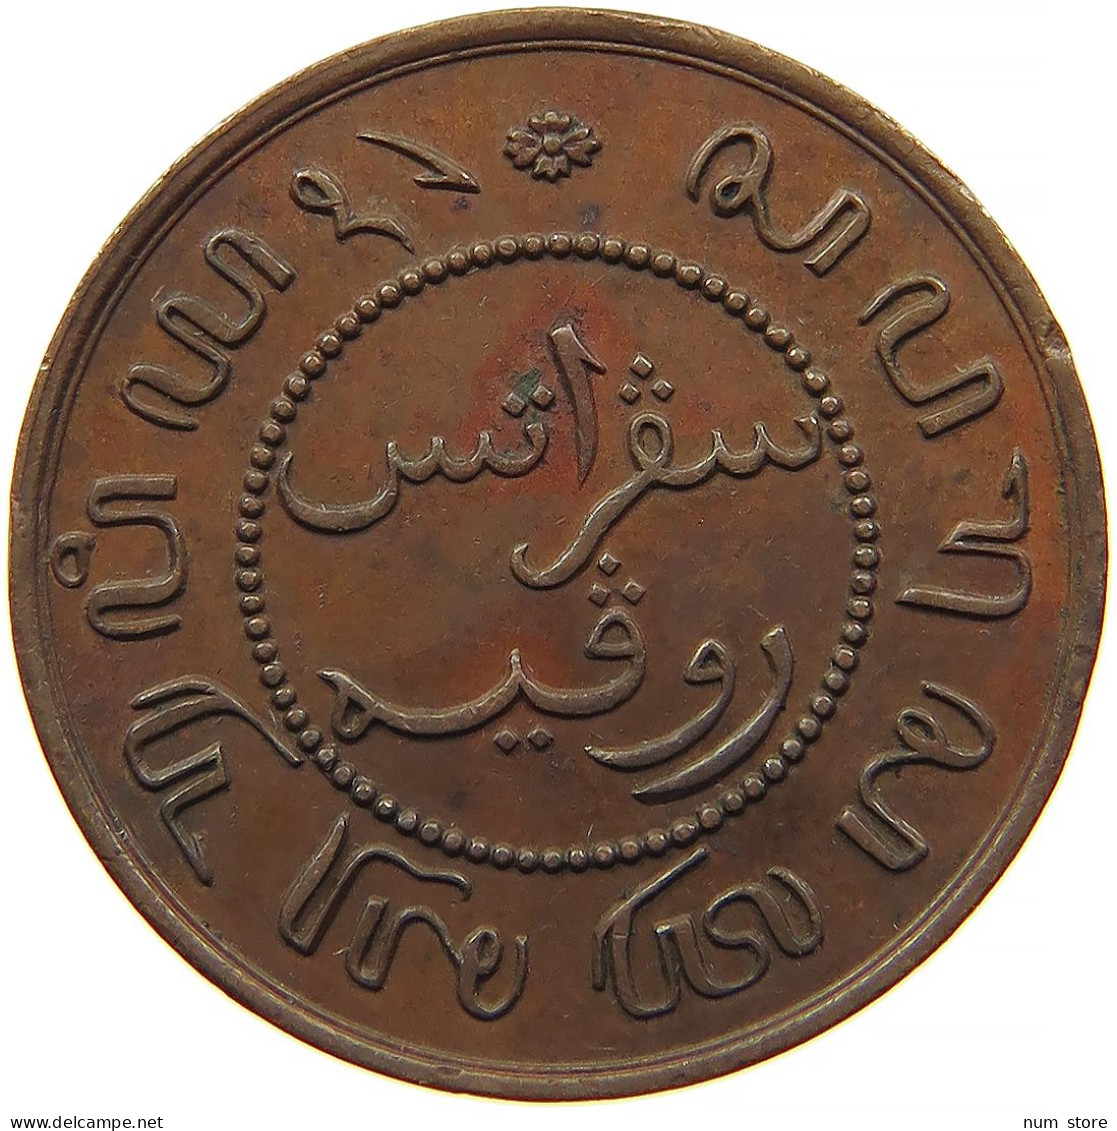 NETHERLANDS EAST INDIES CENT 1855 Willem III. 1849-1890 SHINNY FIELD, EDGE DAMAGES, PROOF EXAMPLE #t028 0441 - 1849-1890: Willem III.